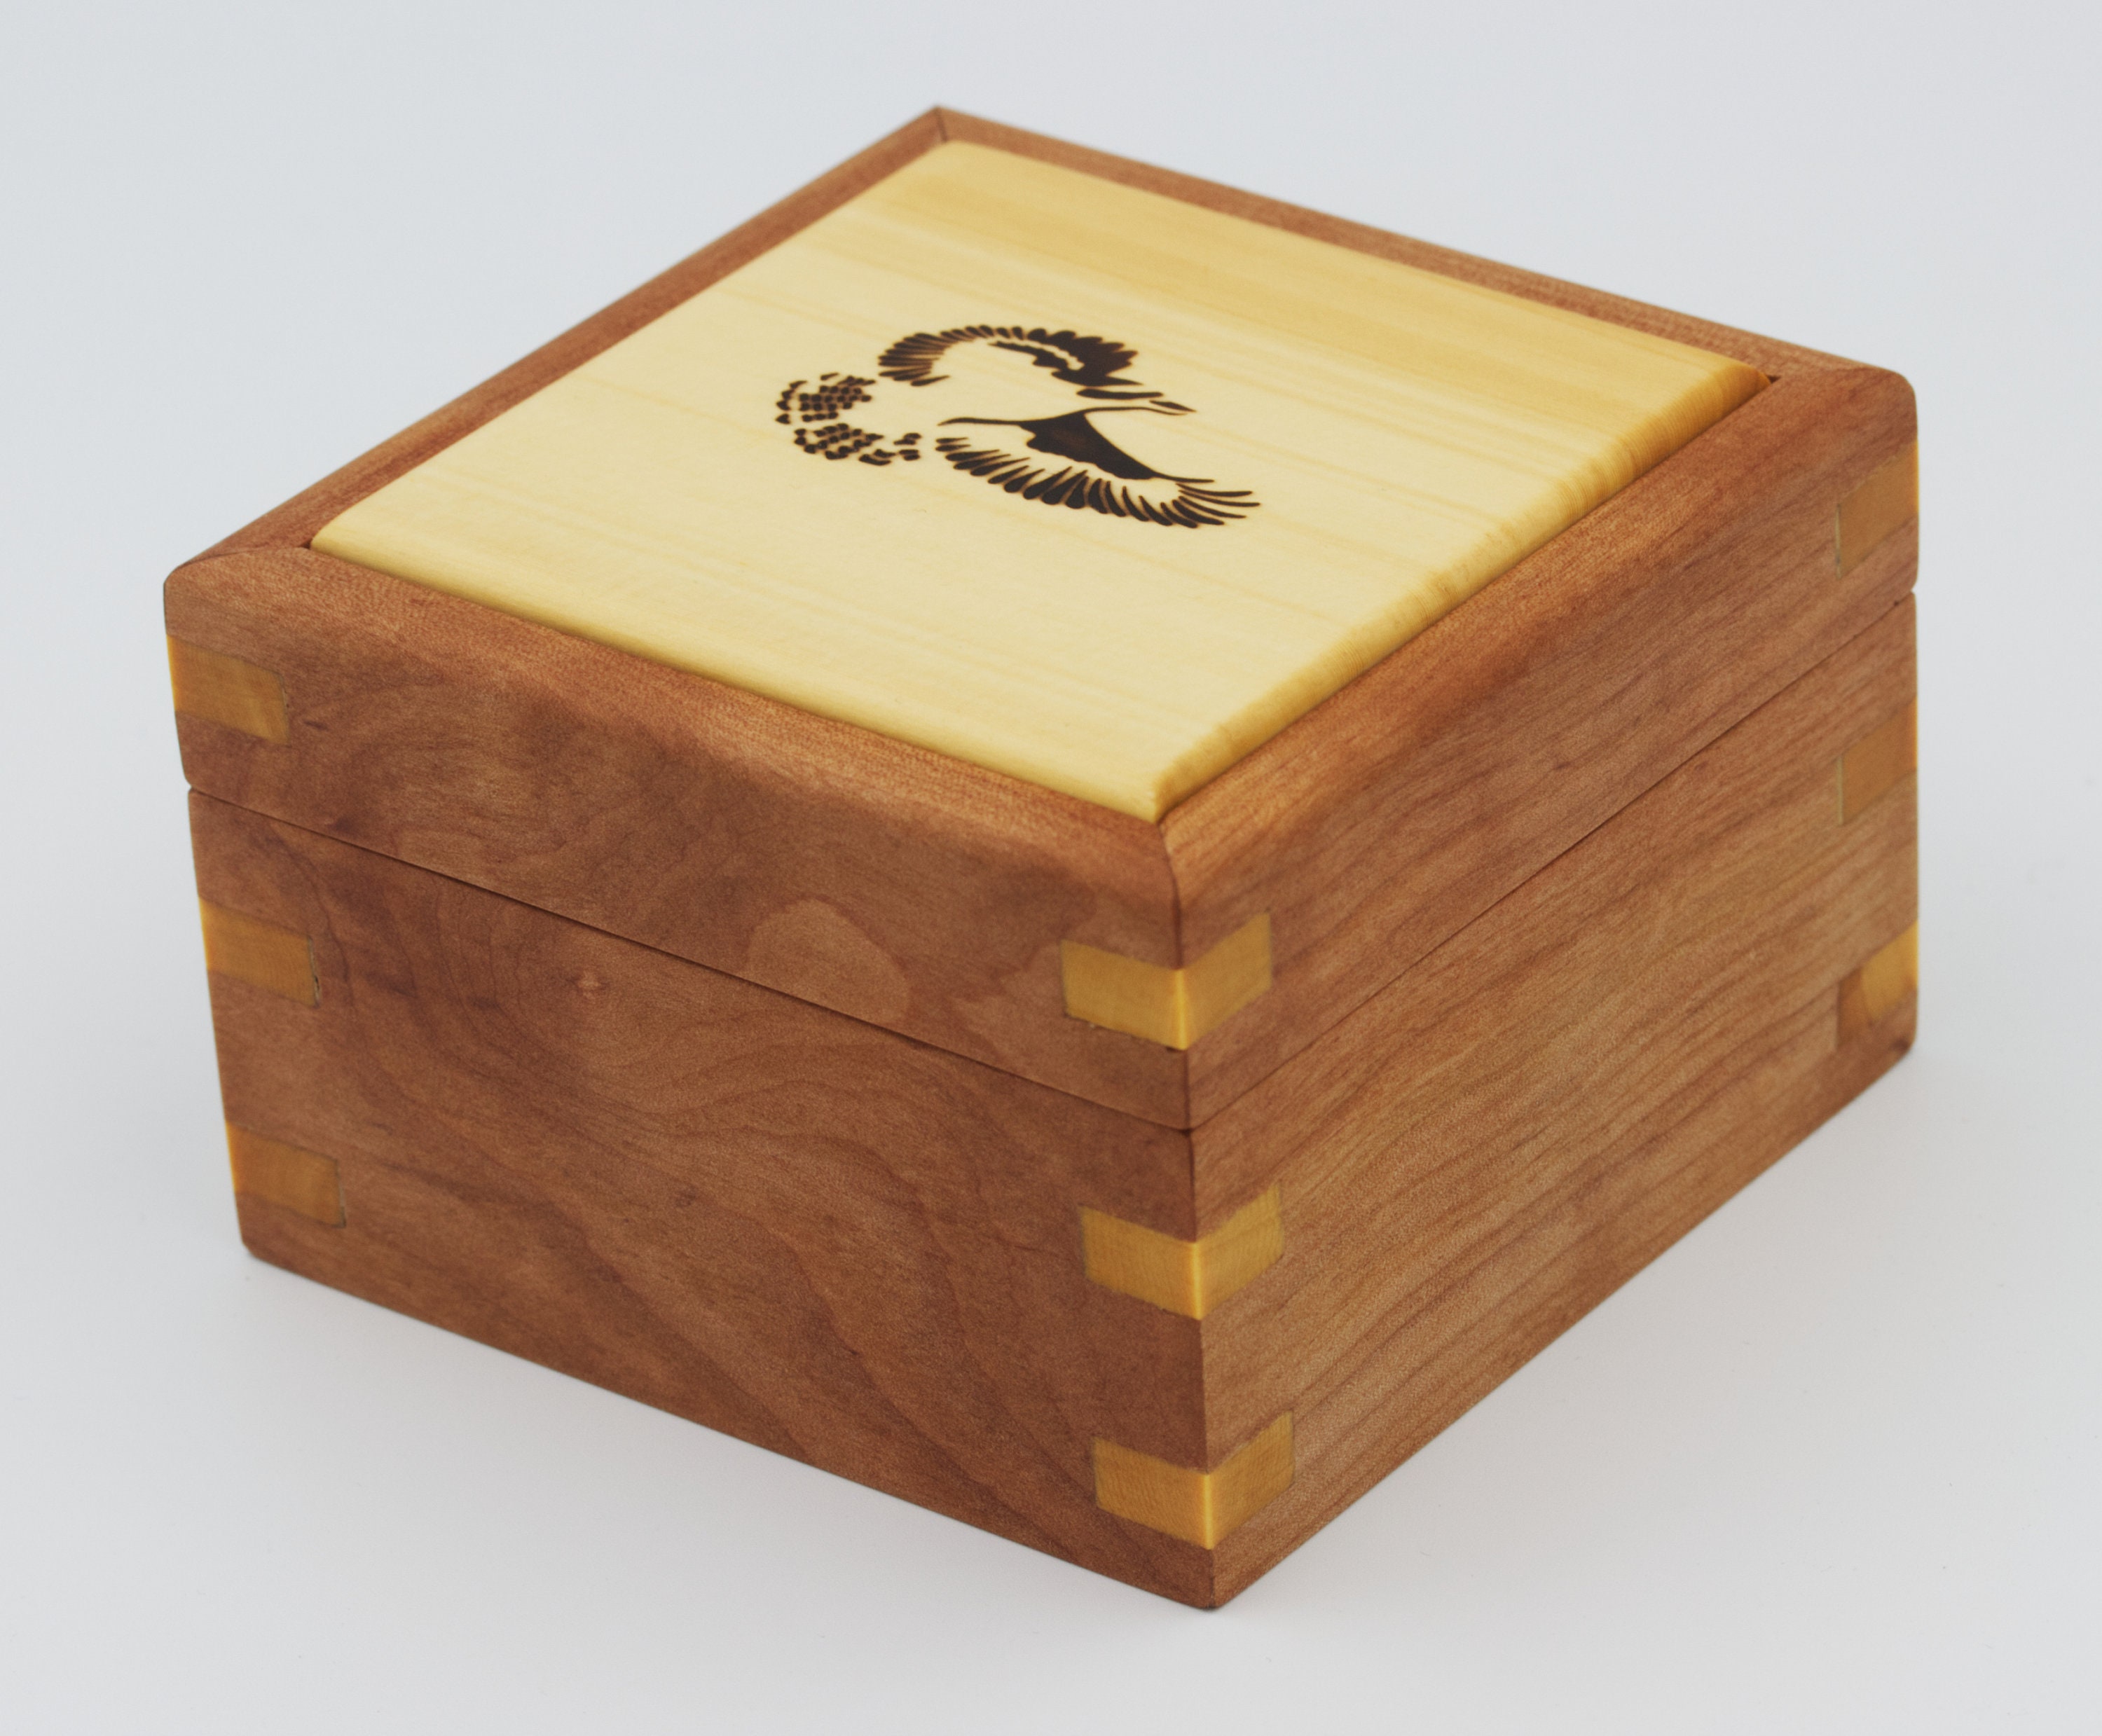 Tie Box - Wooden Box with Lid, Engagement Gift for Him